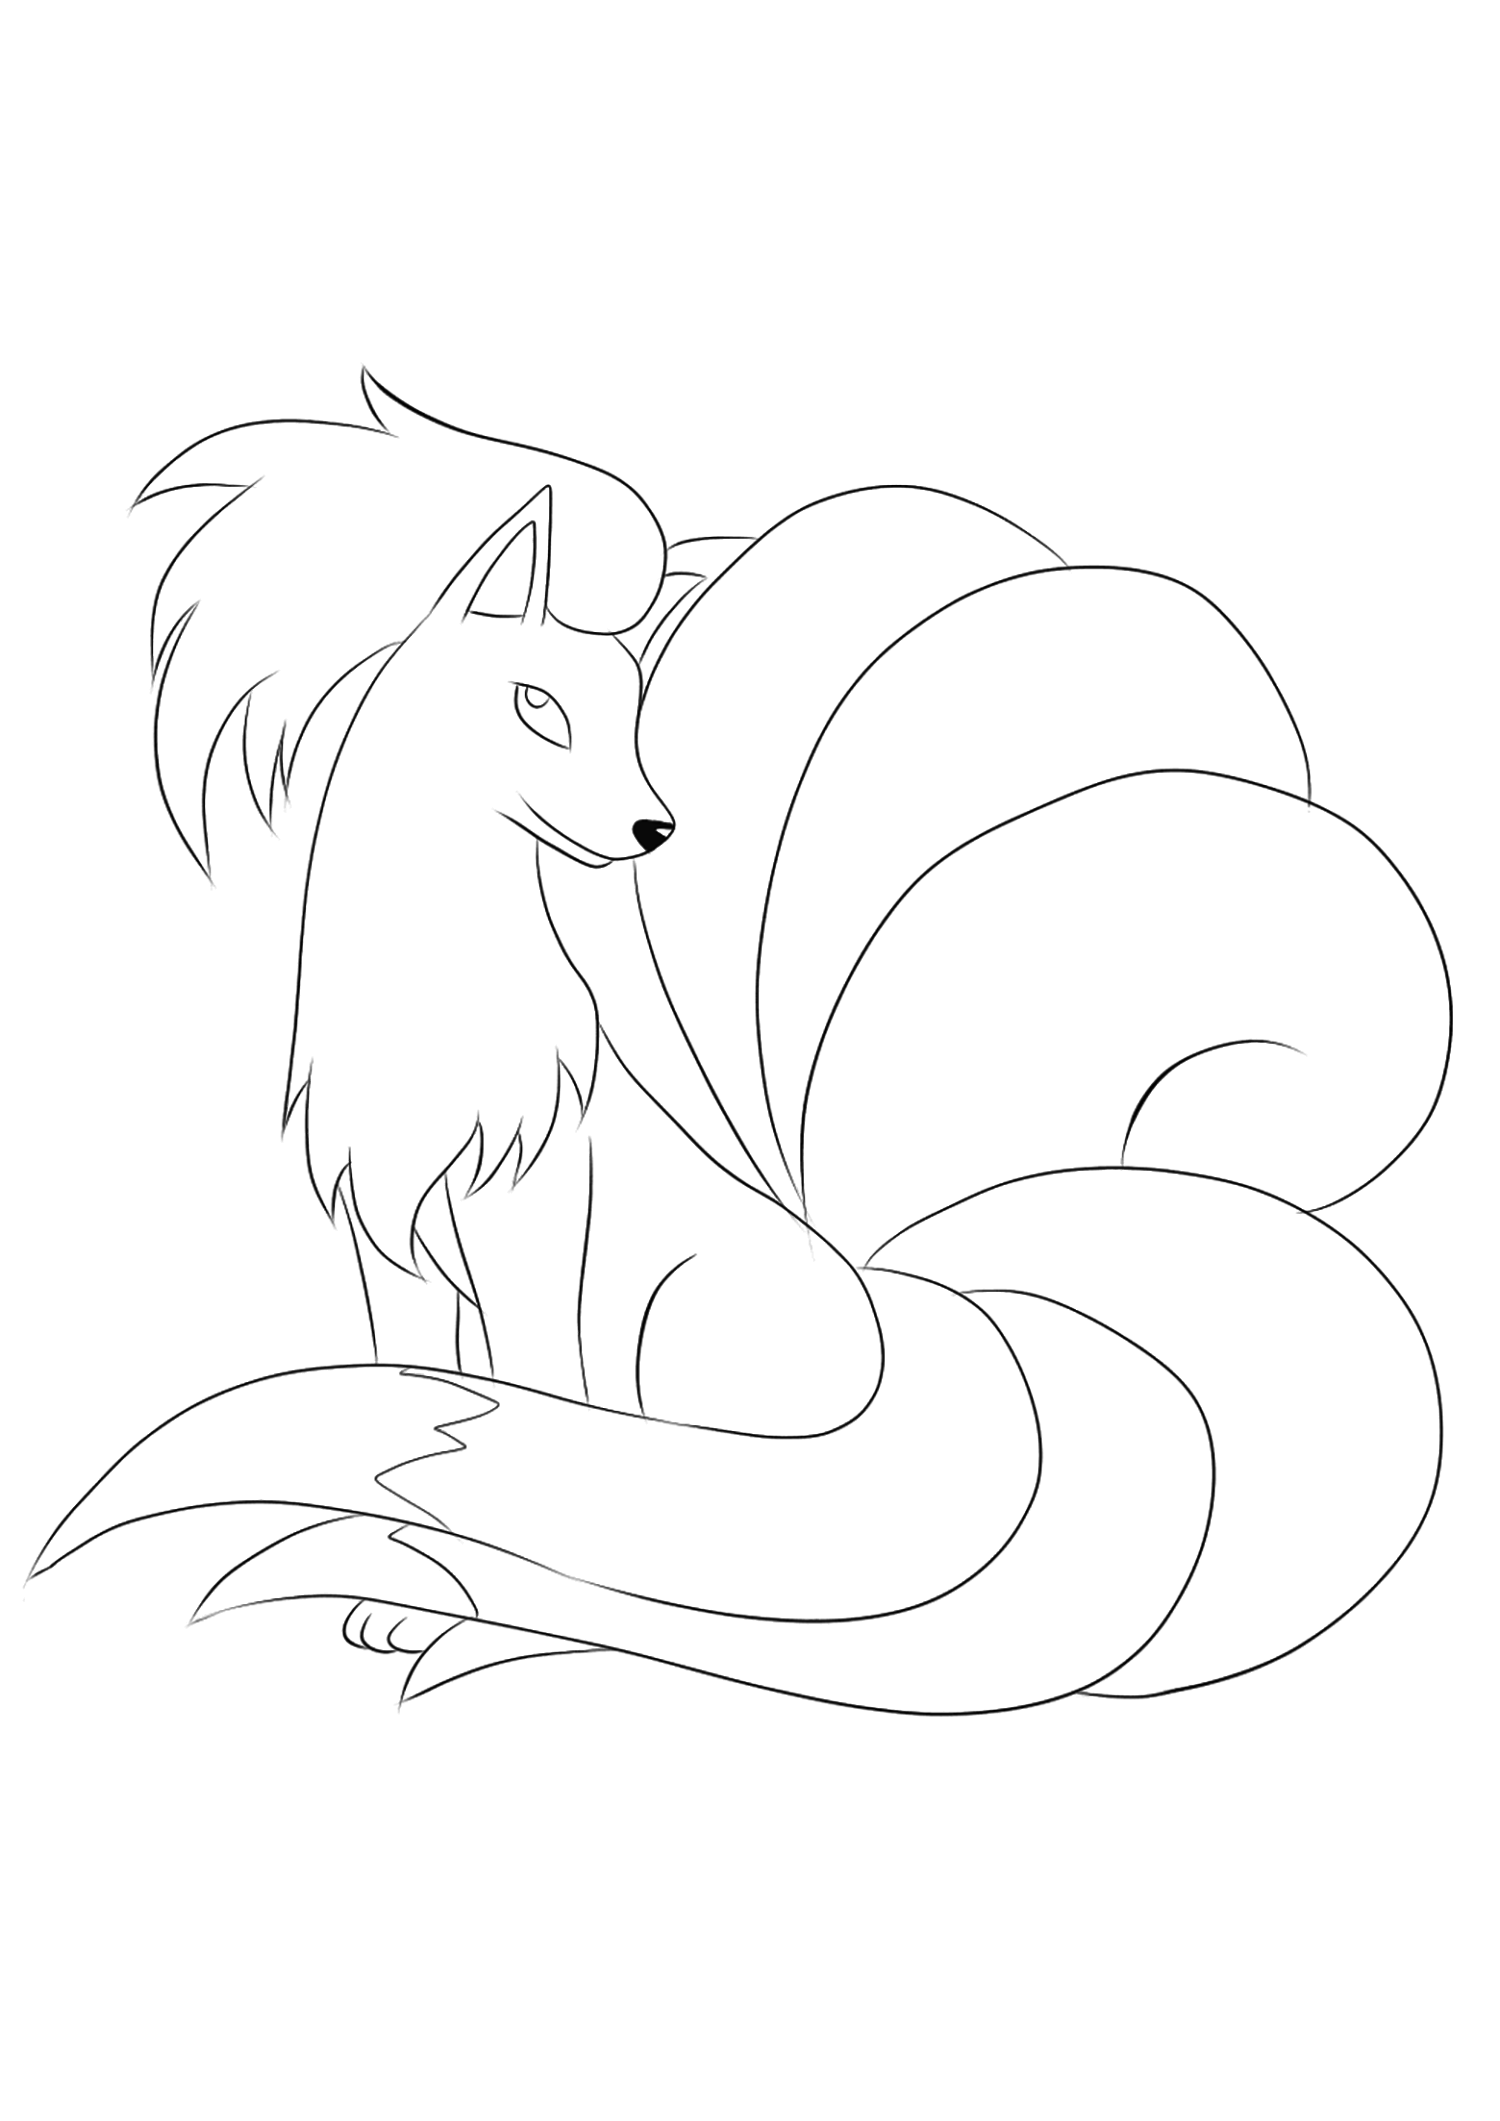 Ninetales () : Pokemon (Generation I) - All Pokemon coloring pages  Kids Coloring Pages